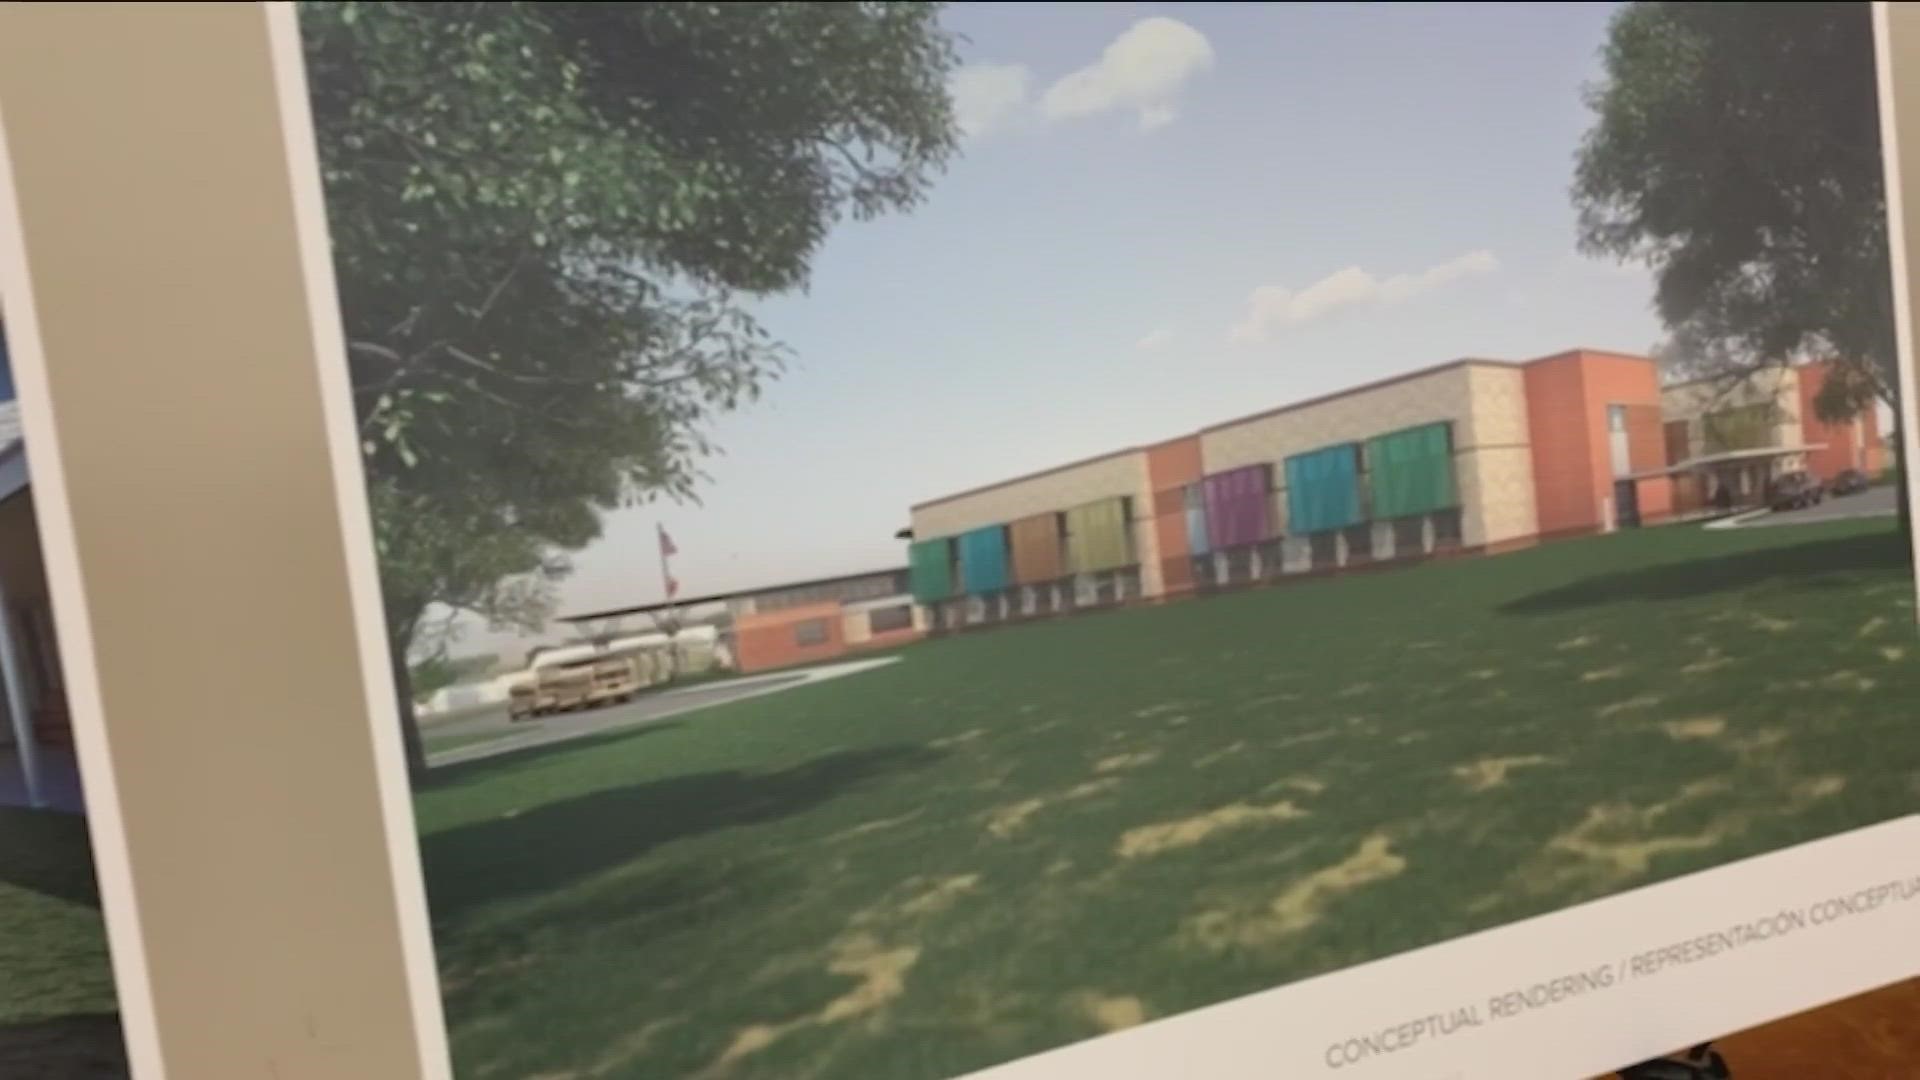 Texas Women's Basketball is putting thousands of dollars in ticket sales toward building a new elementary school in Uvalde.